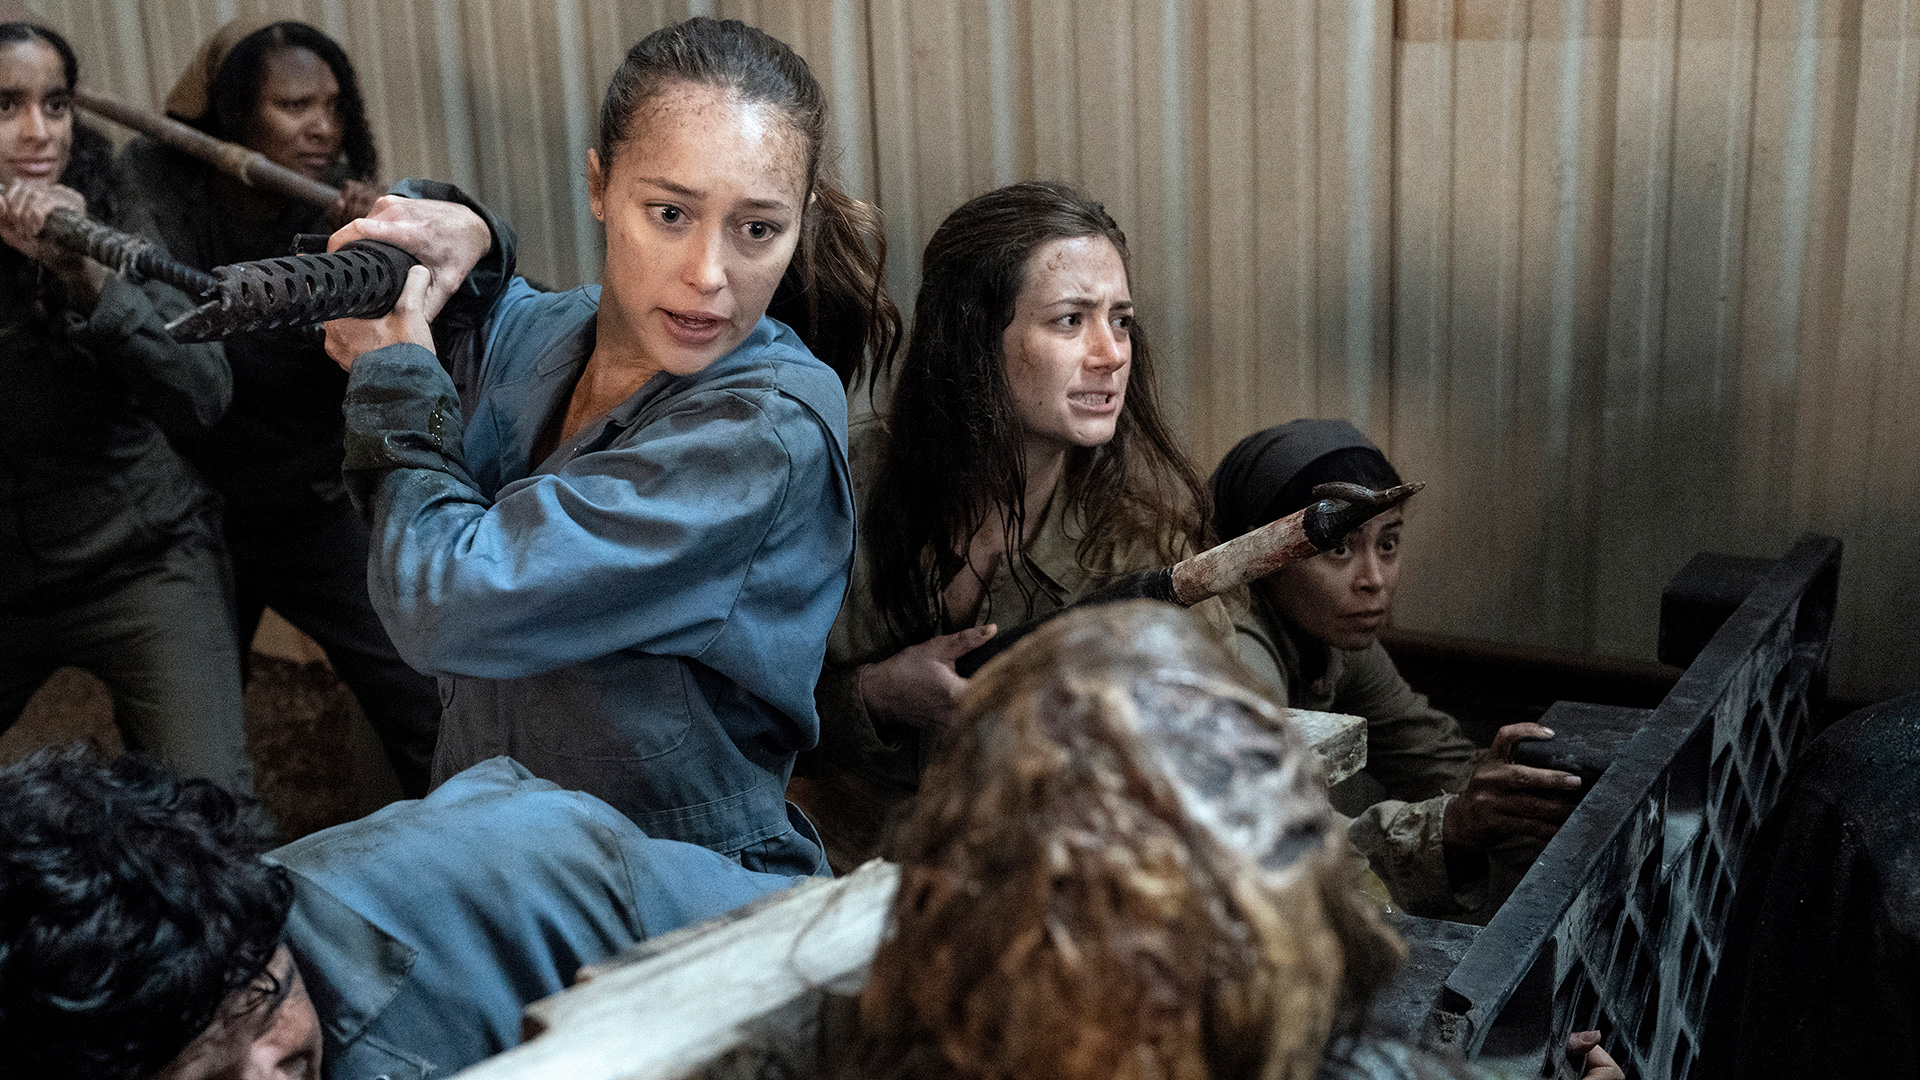 Welcome to the Club, Alicia and Strand face an unusual walker threat., TV-MA, Season 1008386, Episode 2